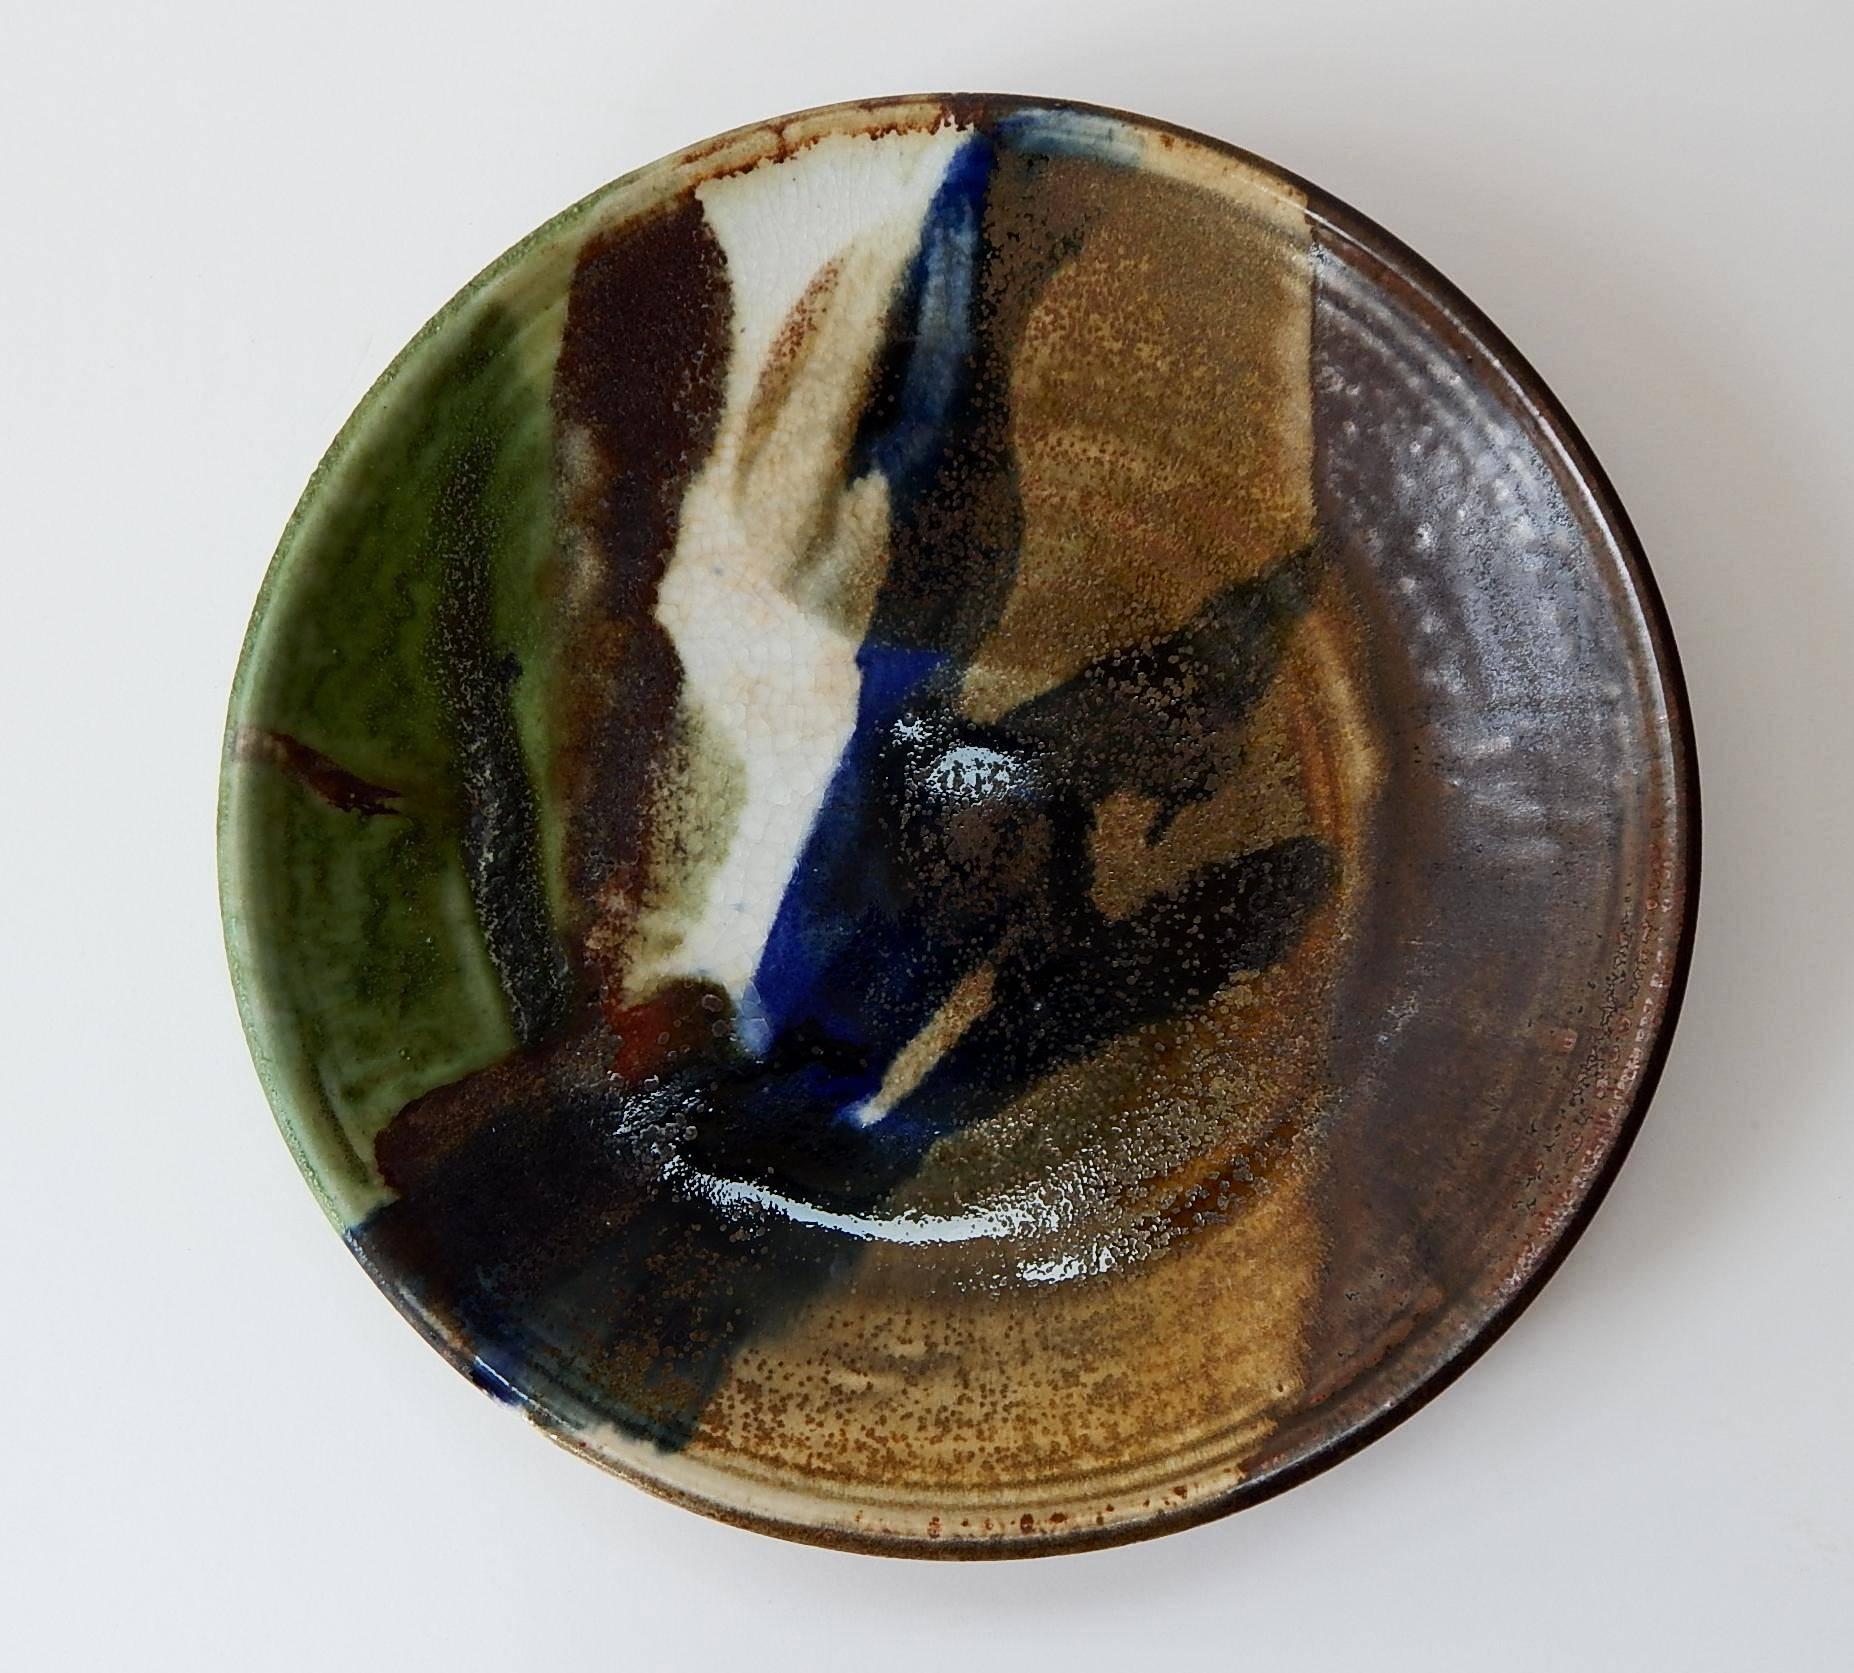 Excellent piece by Takaezu in mint condition, great color.
11 1/4 inches in diameter.
Signed with her TT monogram.

Toshiko Takaezu (1922-2011), a Japanese-American ceramist who helped elevate ceramics from the production of functional vessels